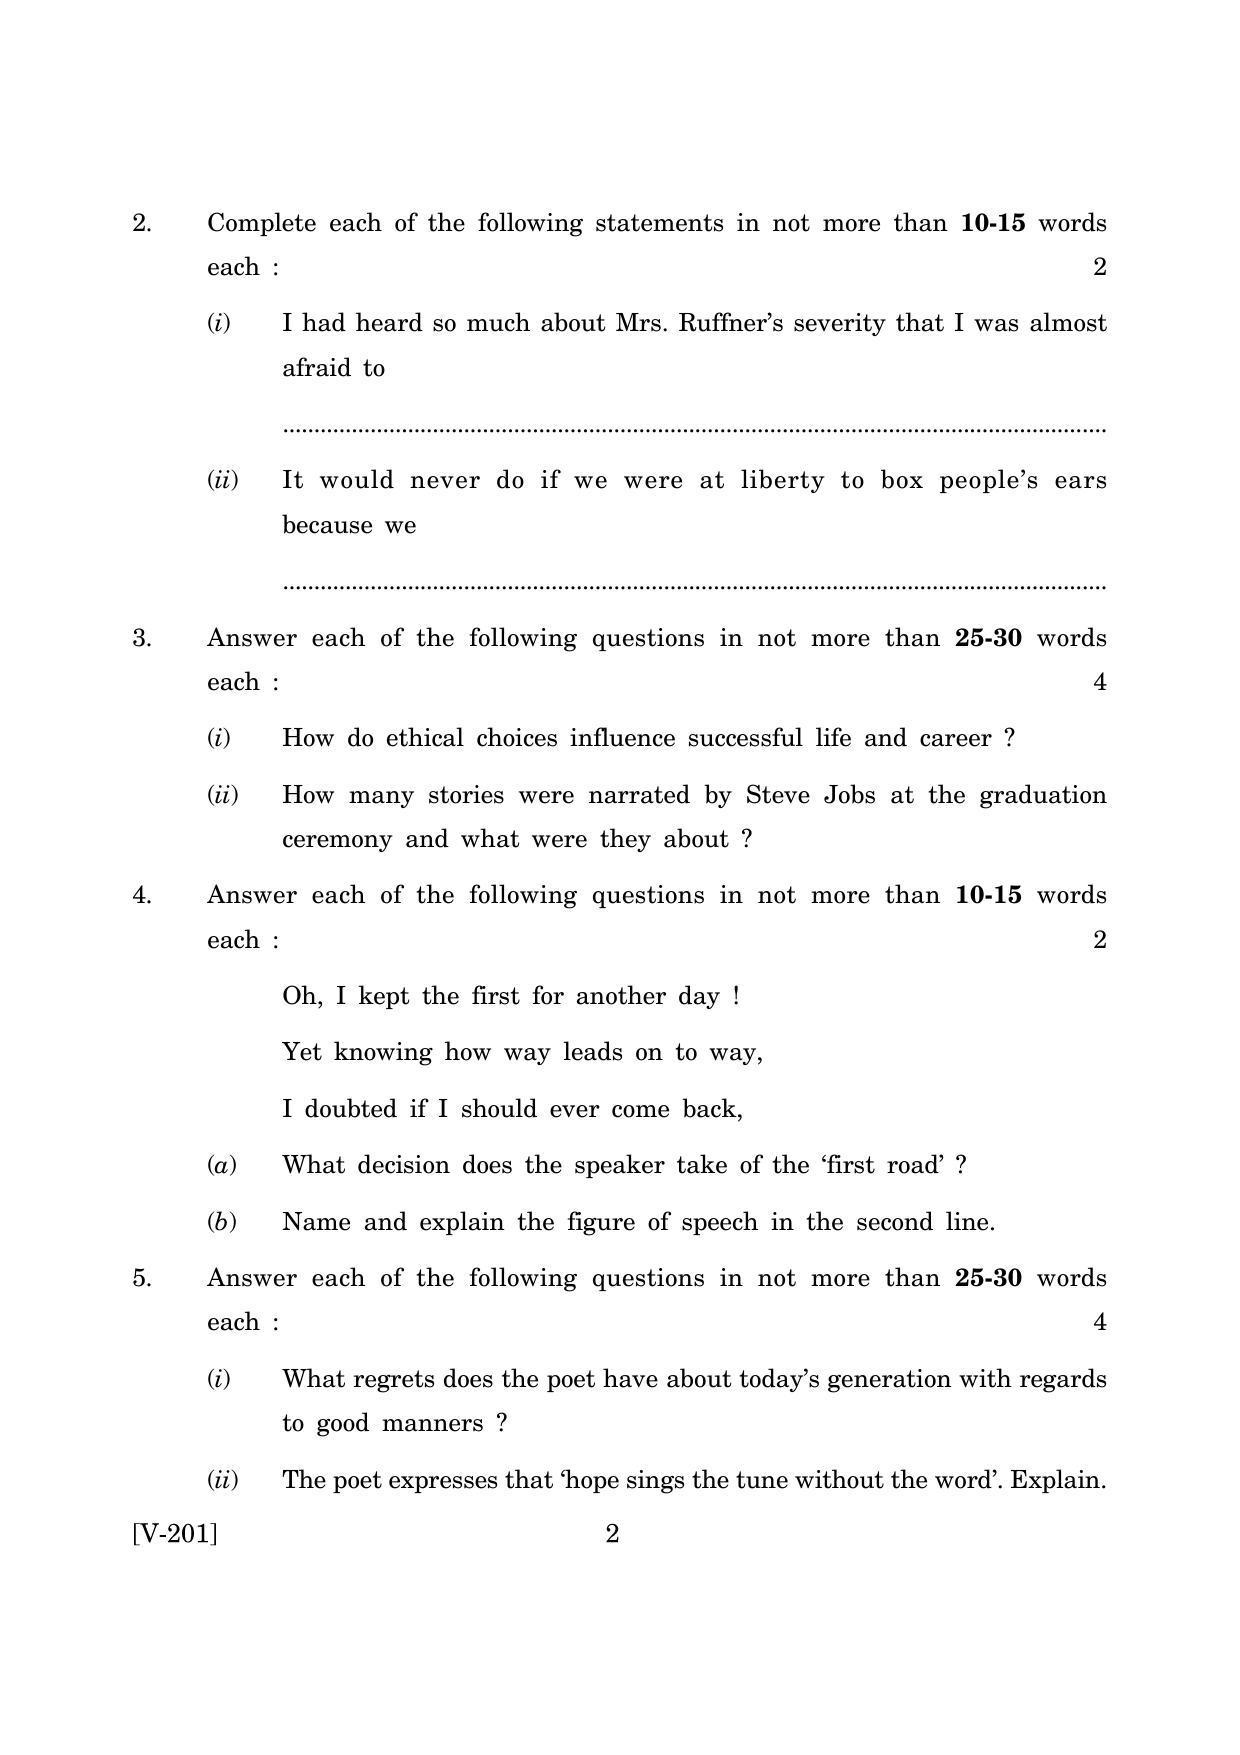 Goa Board Class 12 English Communication Skills  2019 (March 2019) Question Paper - Page 2